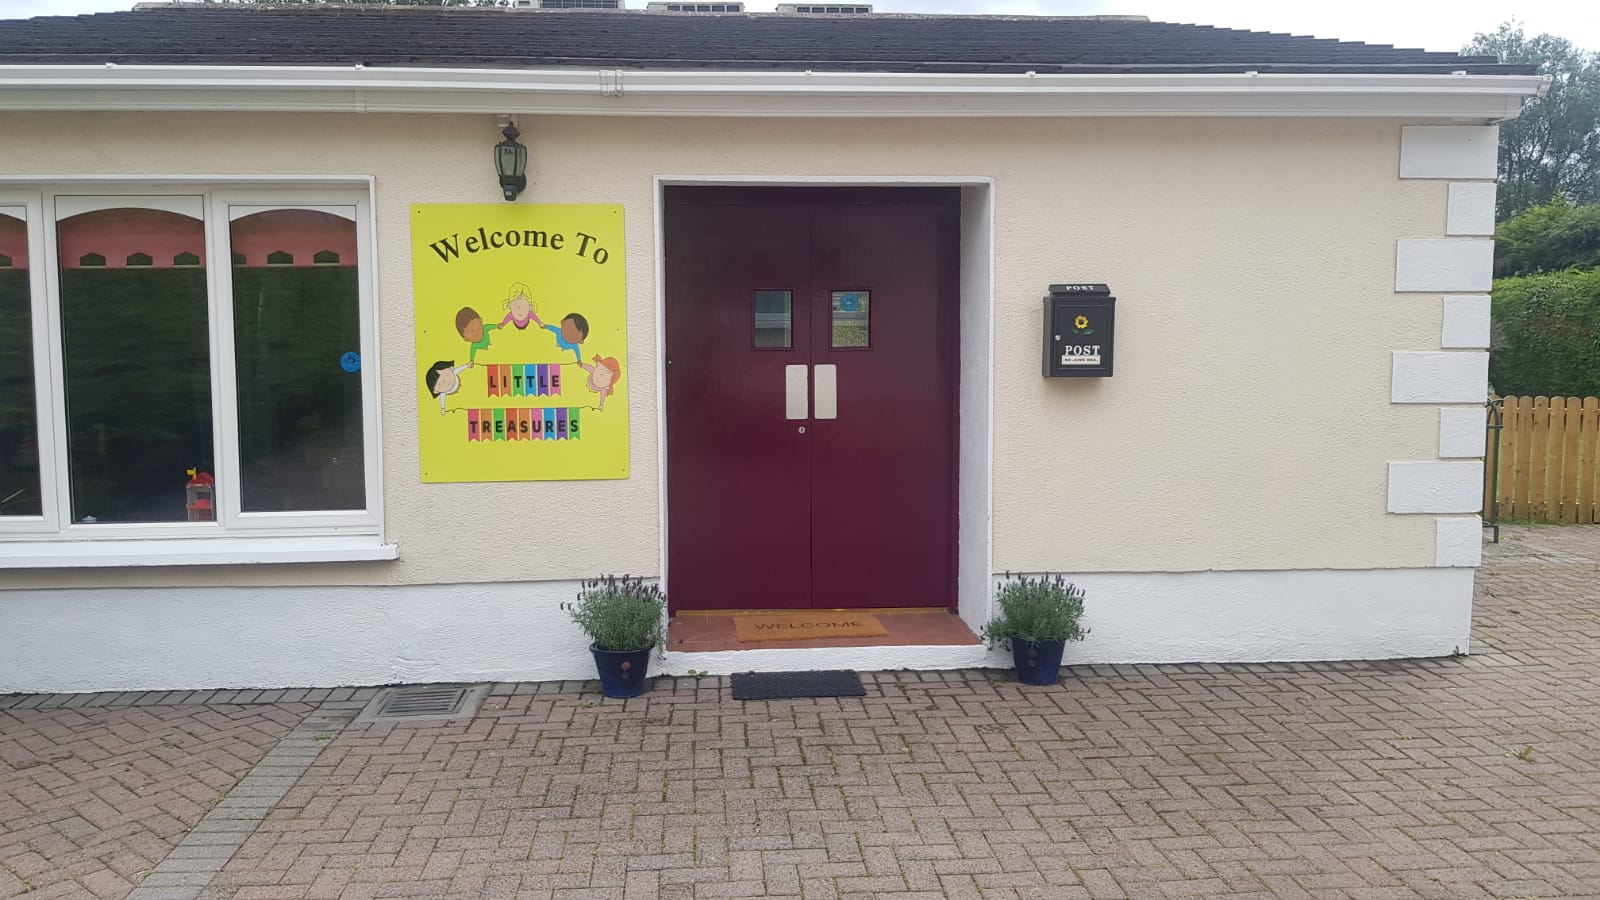 After School Service Now Up And Running For New Term In Little Treasures In Portlaoise Laois Today